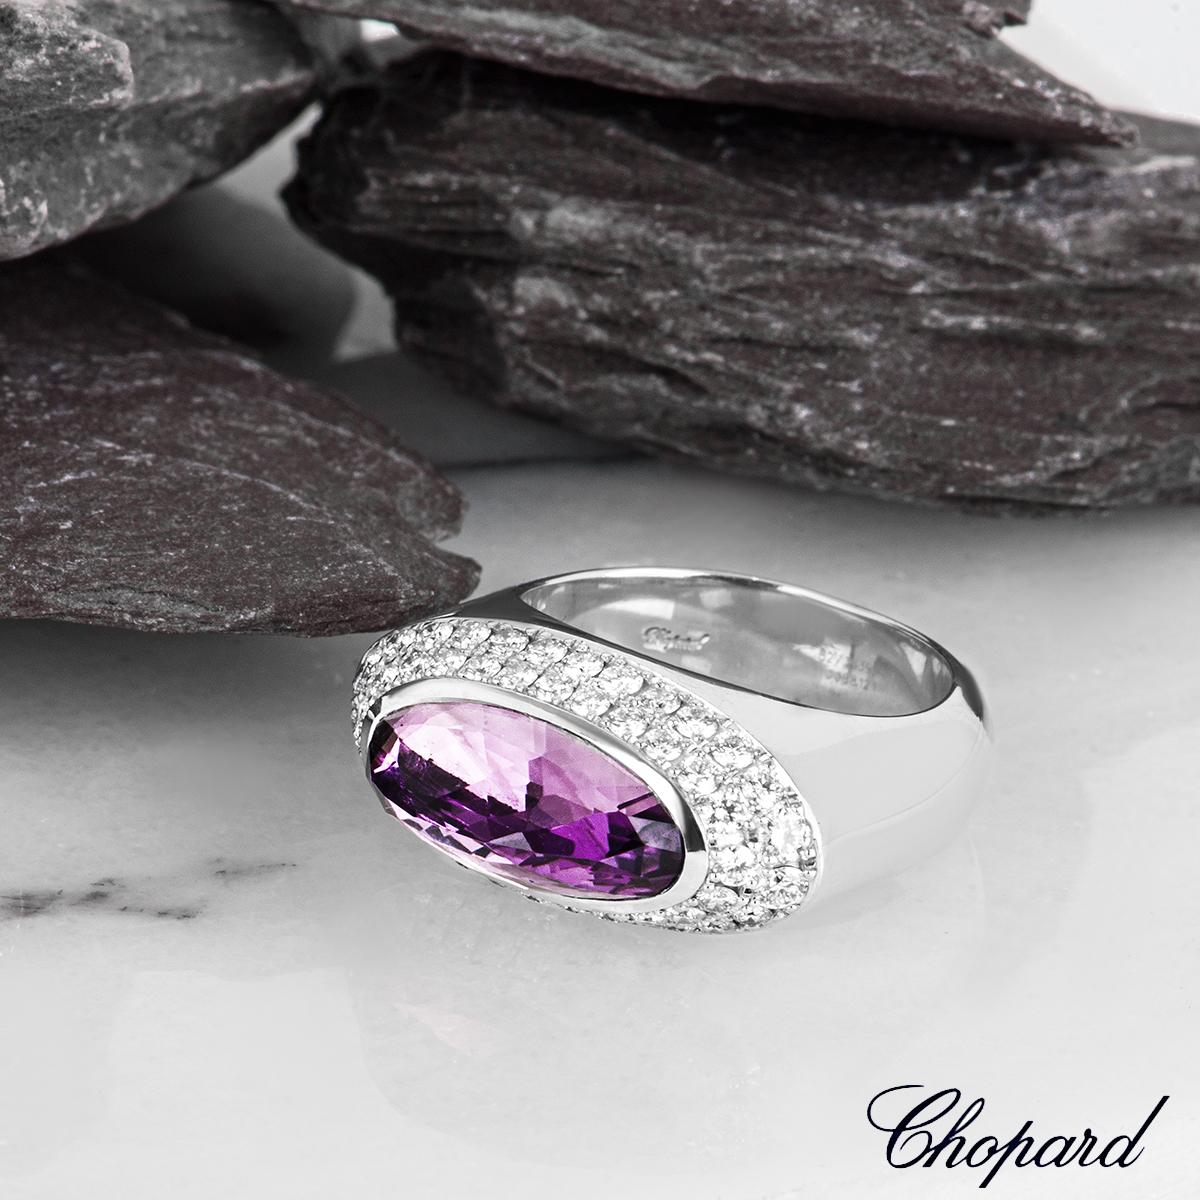 Chopard White Gold Amethyst & Diamond Ring 82/3839-1110 For Sale 1